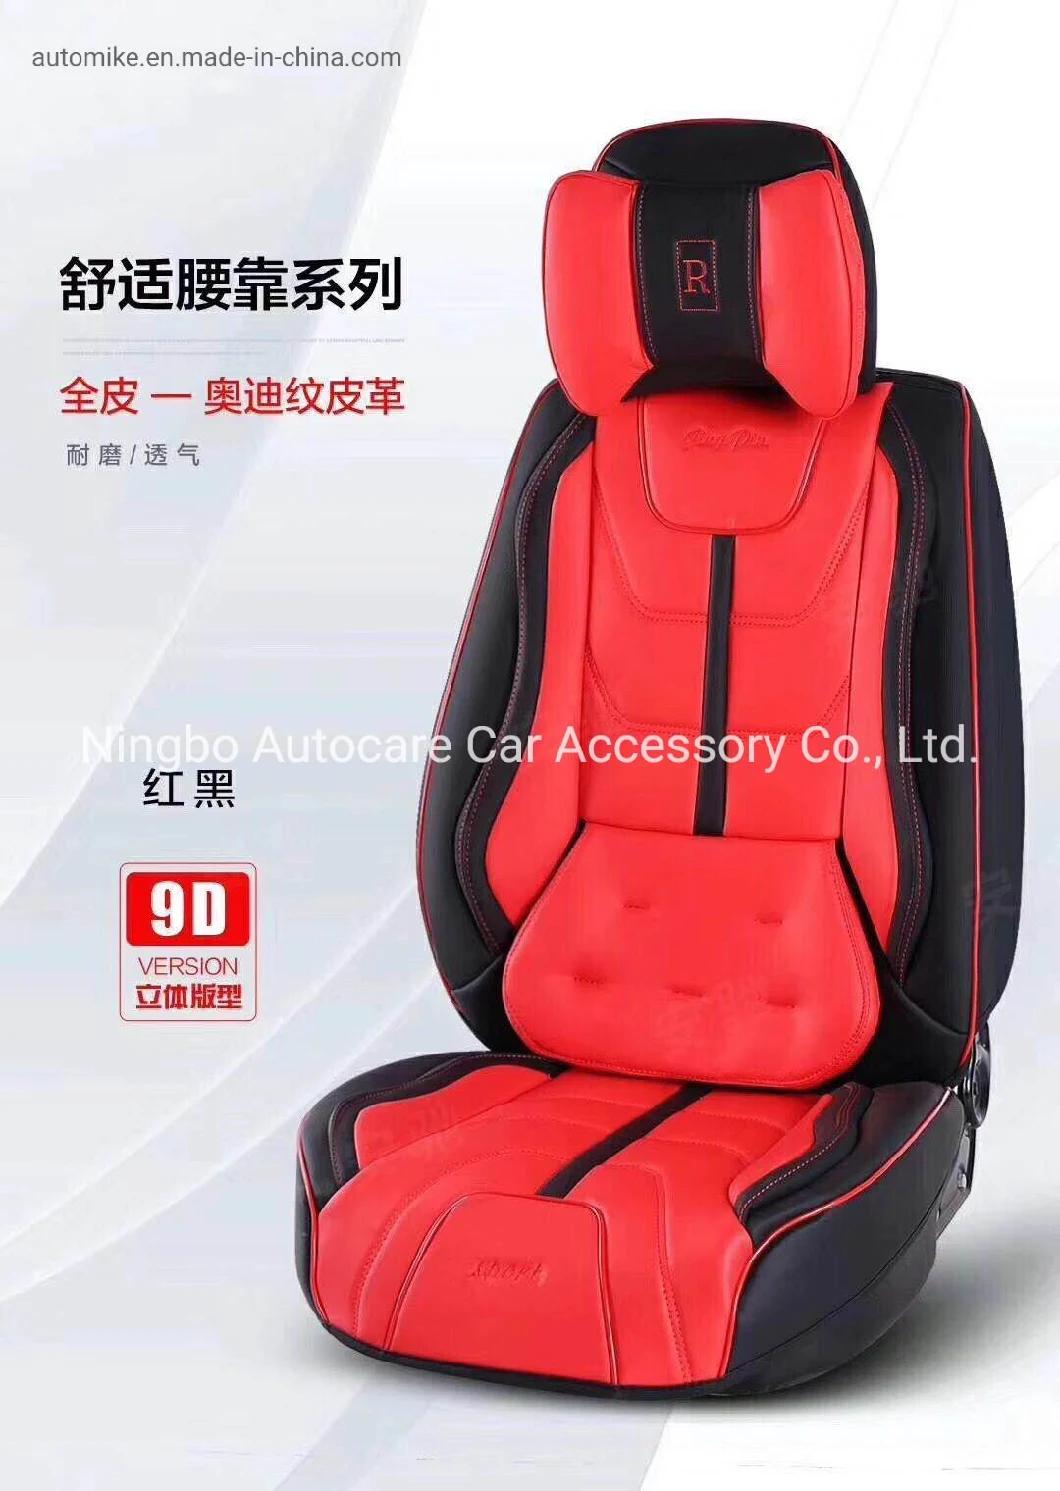 Car Accessories Car Decoration Car Seat Cushion Full Covered Pure Leather 9d Car Seat Cover